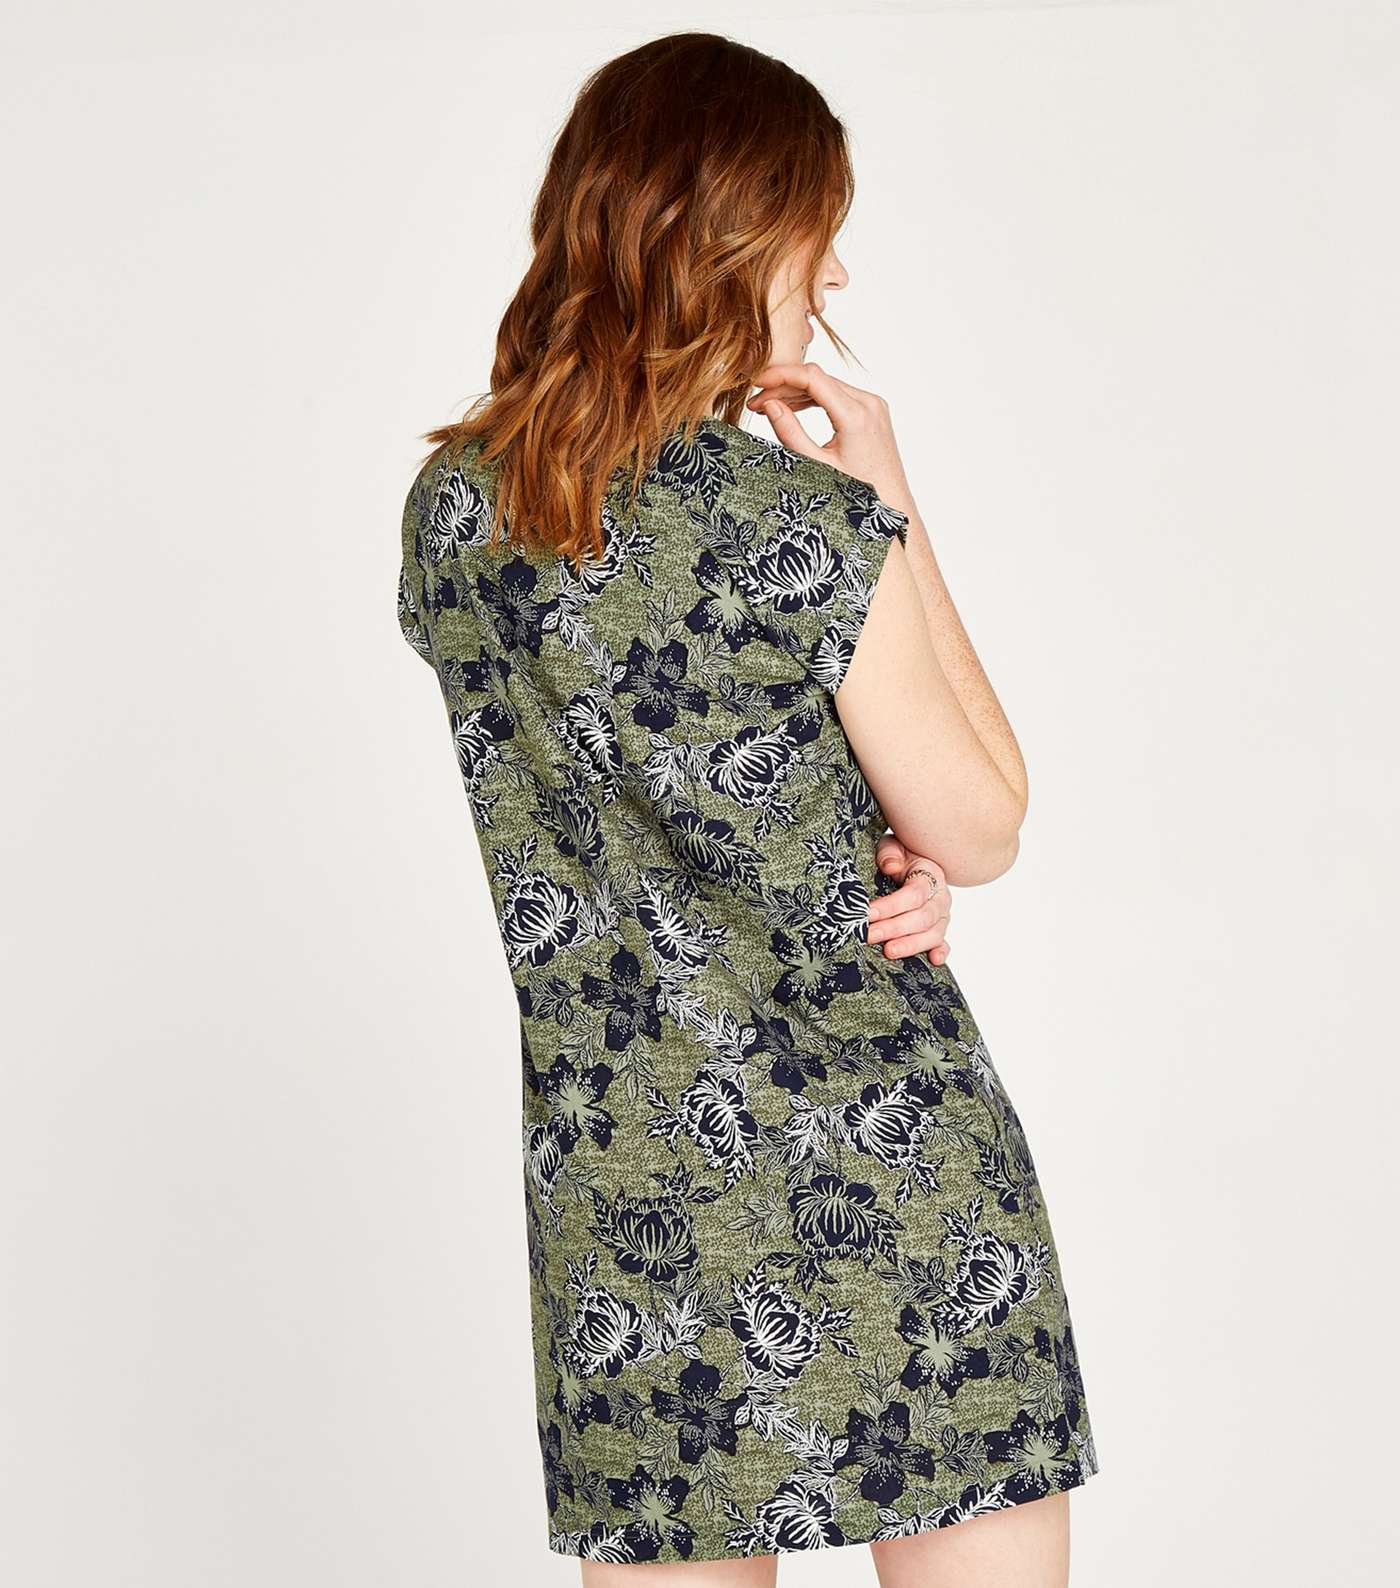 Apricot Olive Floral Cap Roll Sleeve Dress Image 3